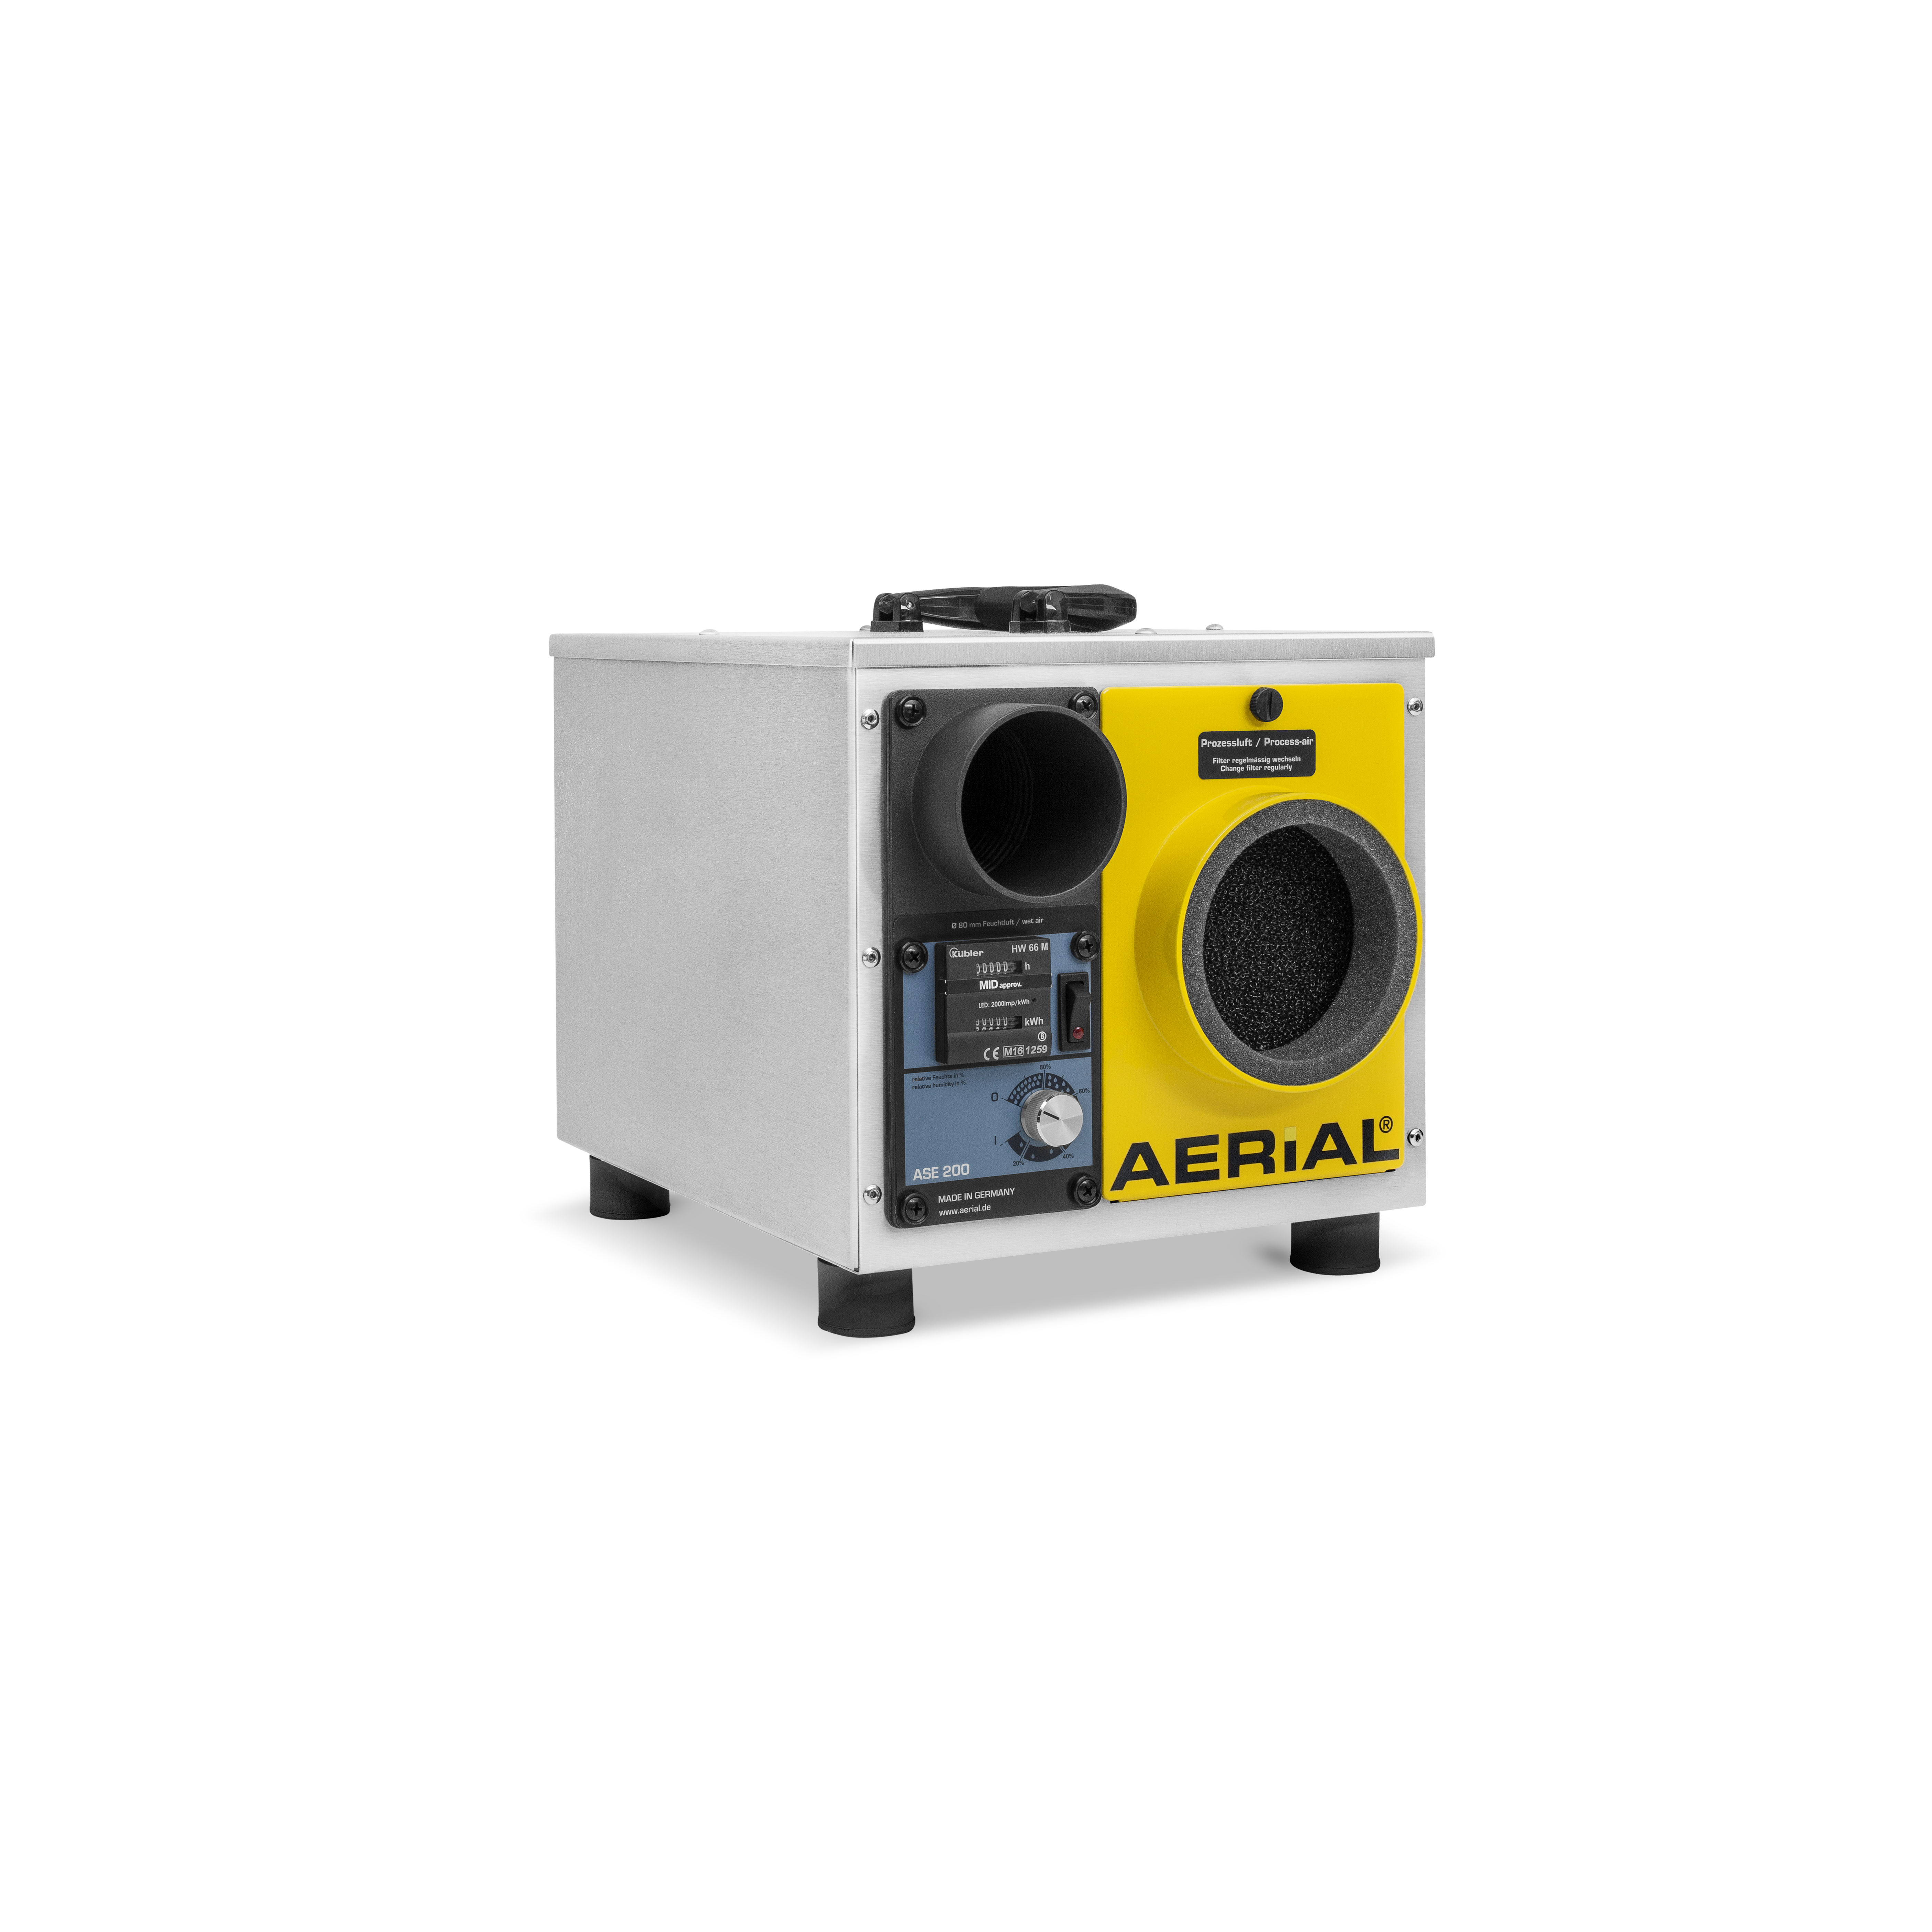 Aerial ASE 200 – commercial adsorption dehumidifier